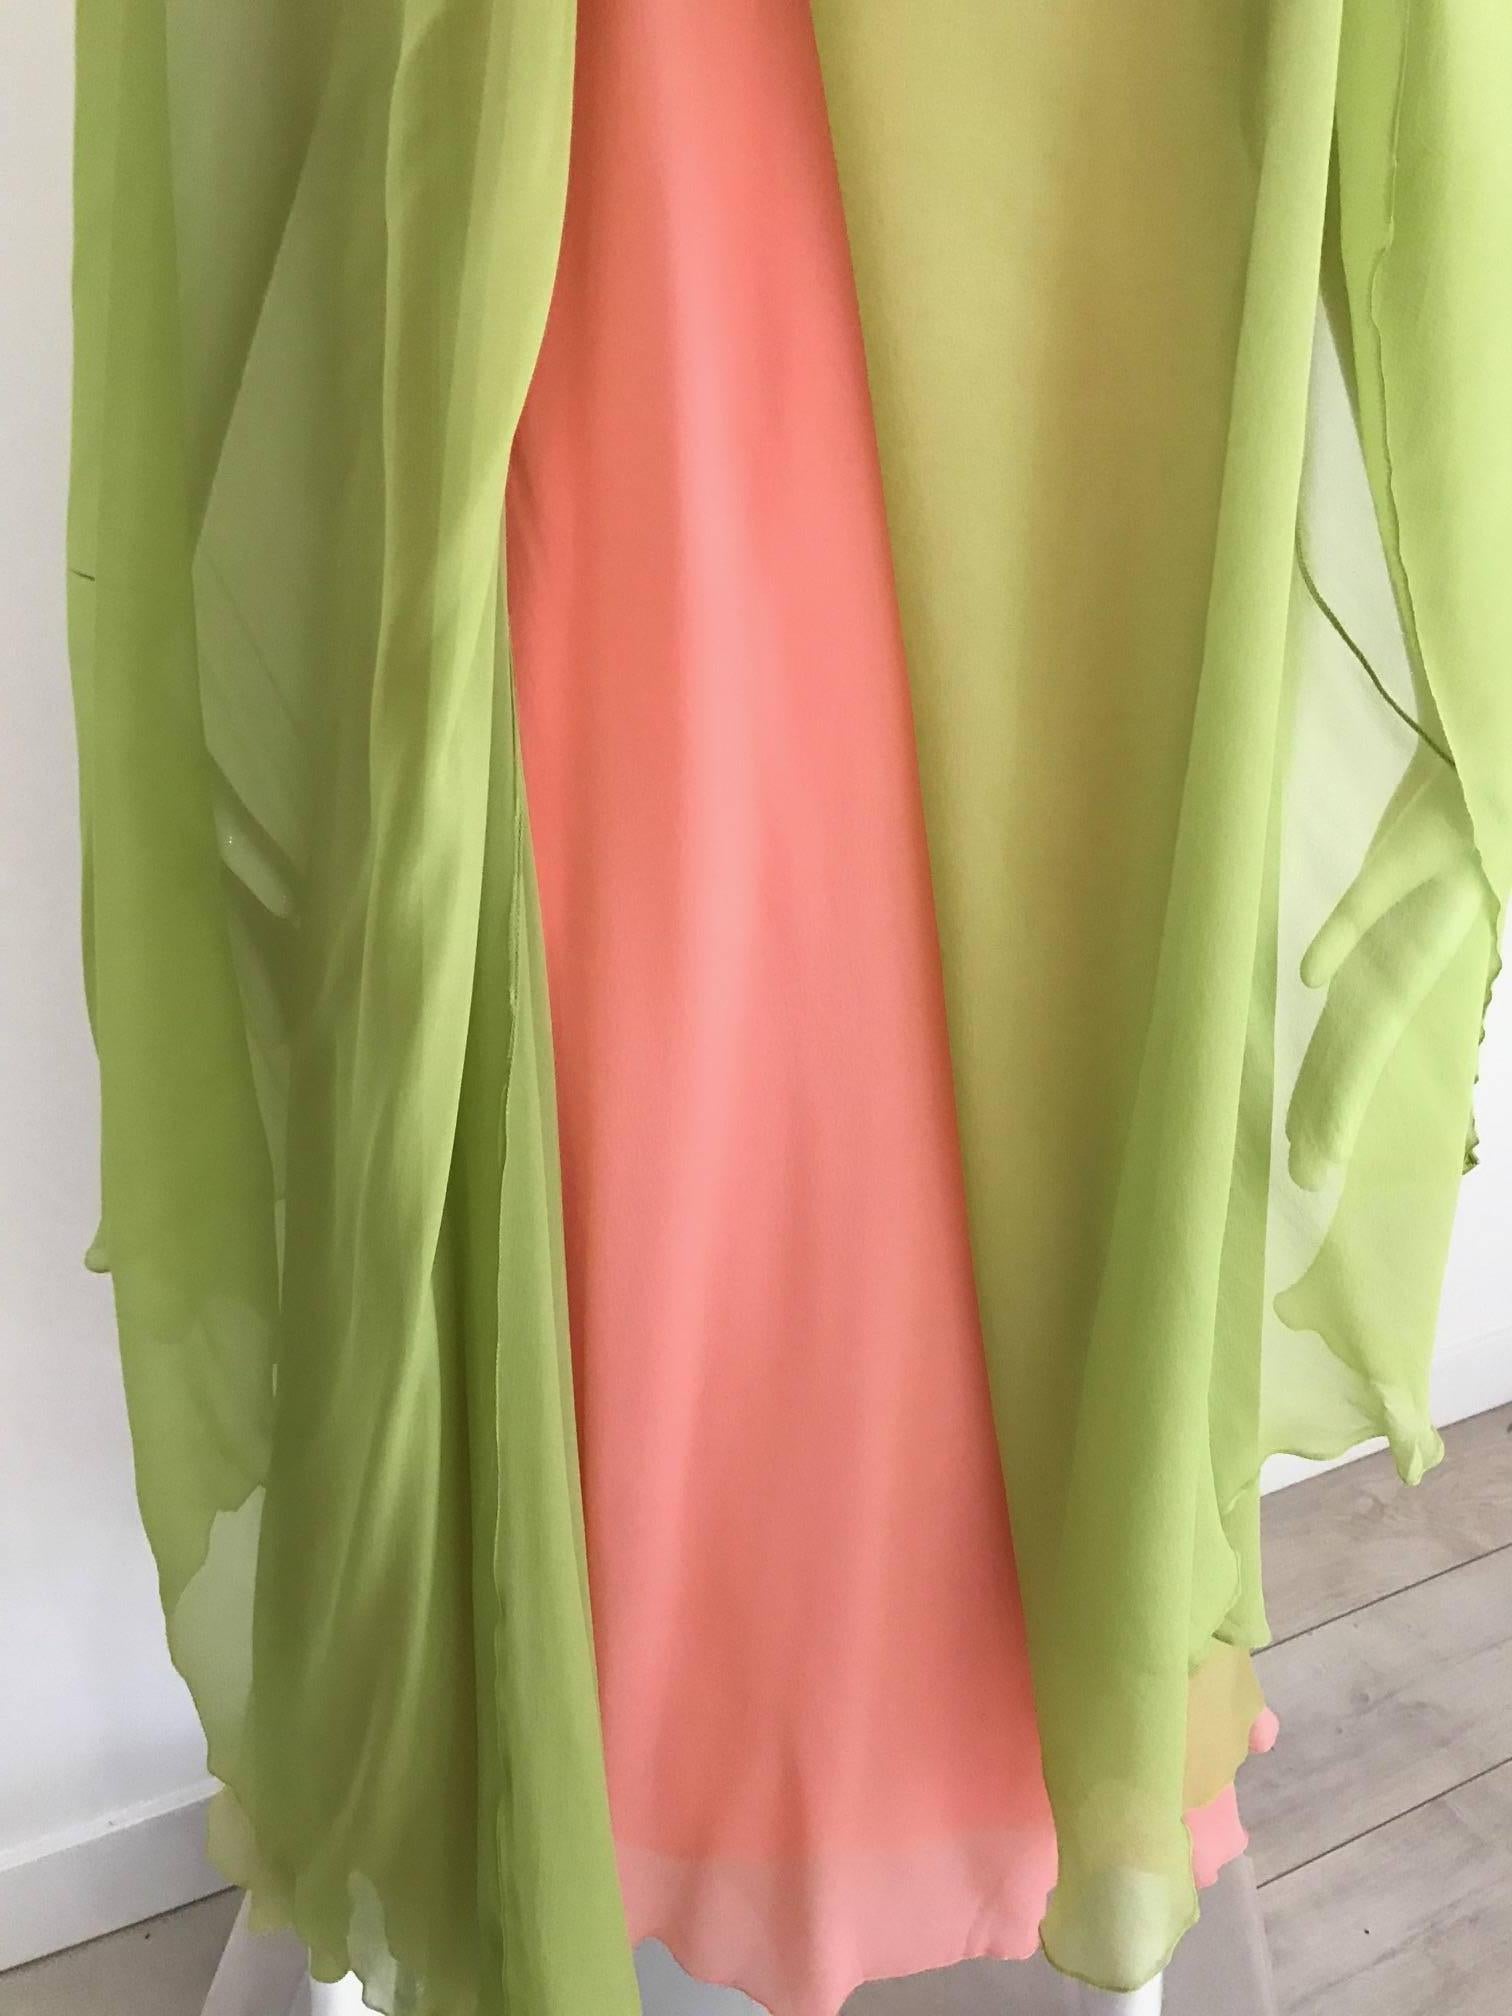 chartreuse evening gown